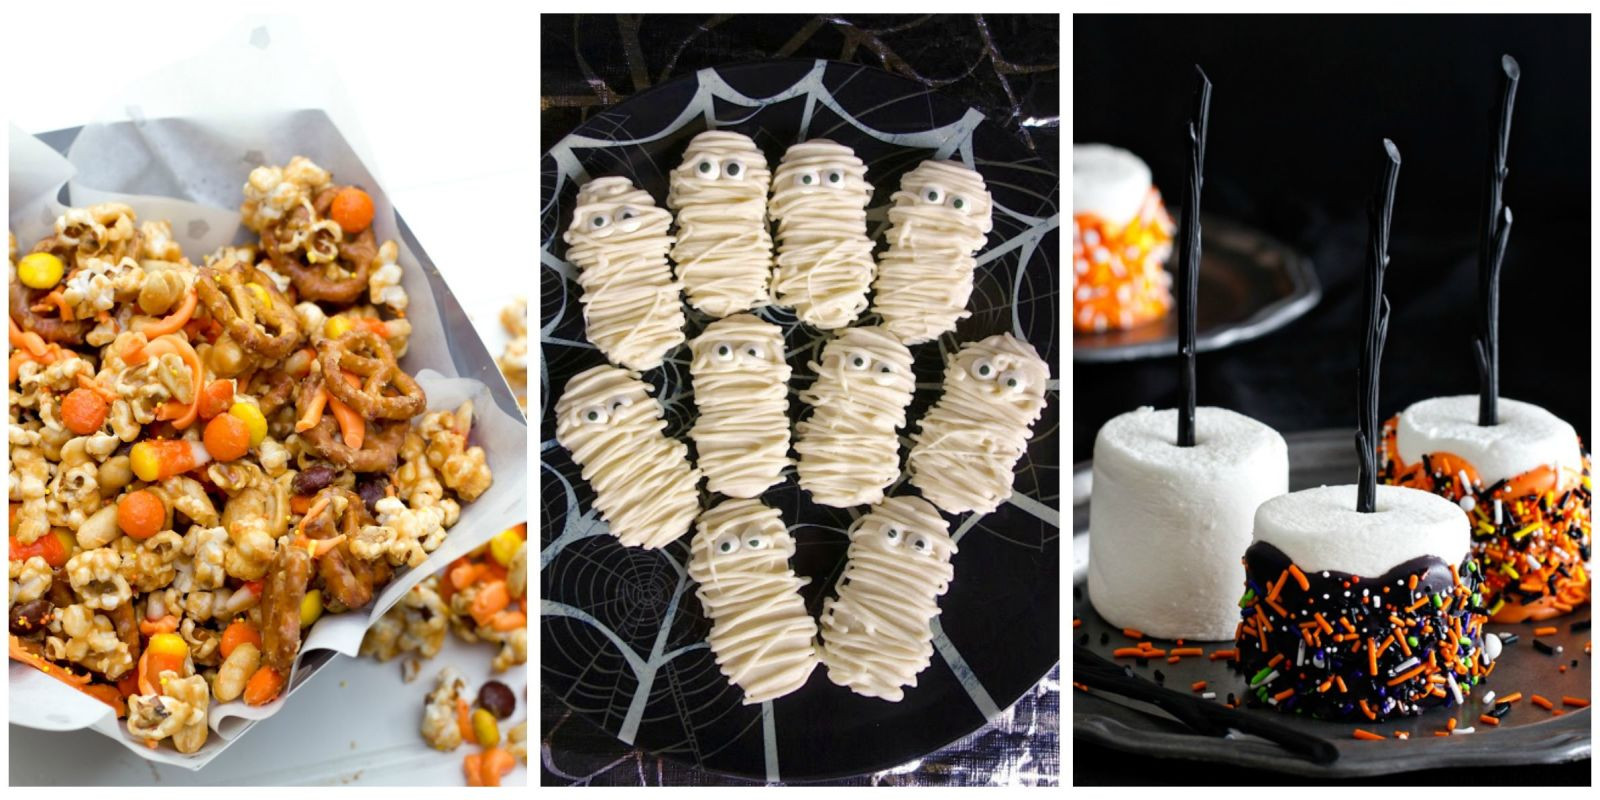 Work Halloween Party Ideas
 22 Easy Halloween Party Food Ideas Cute Recipes for